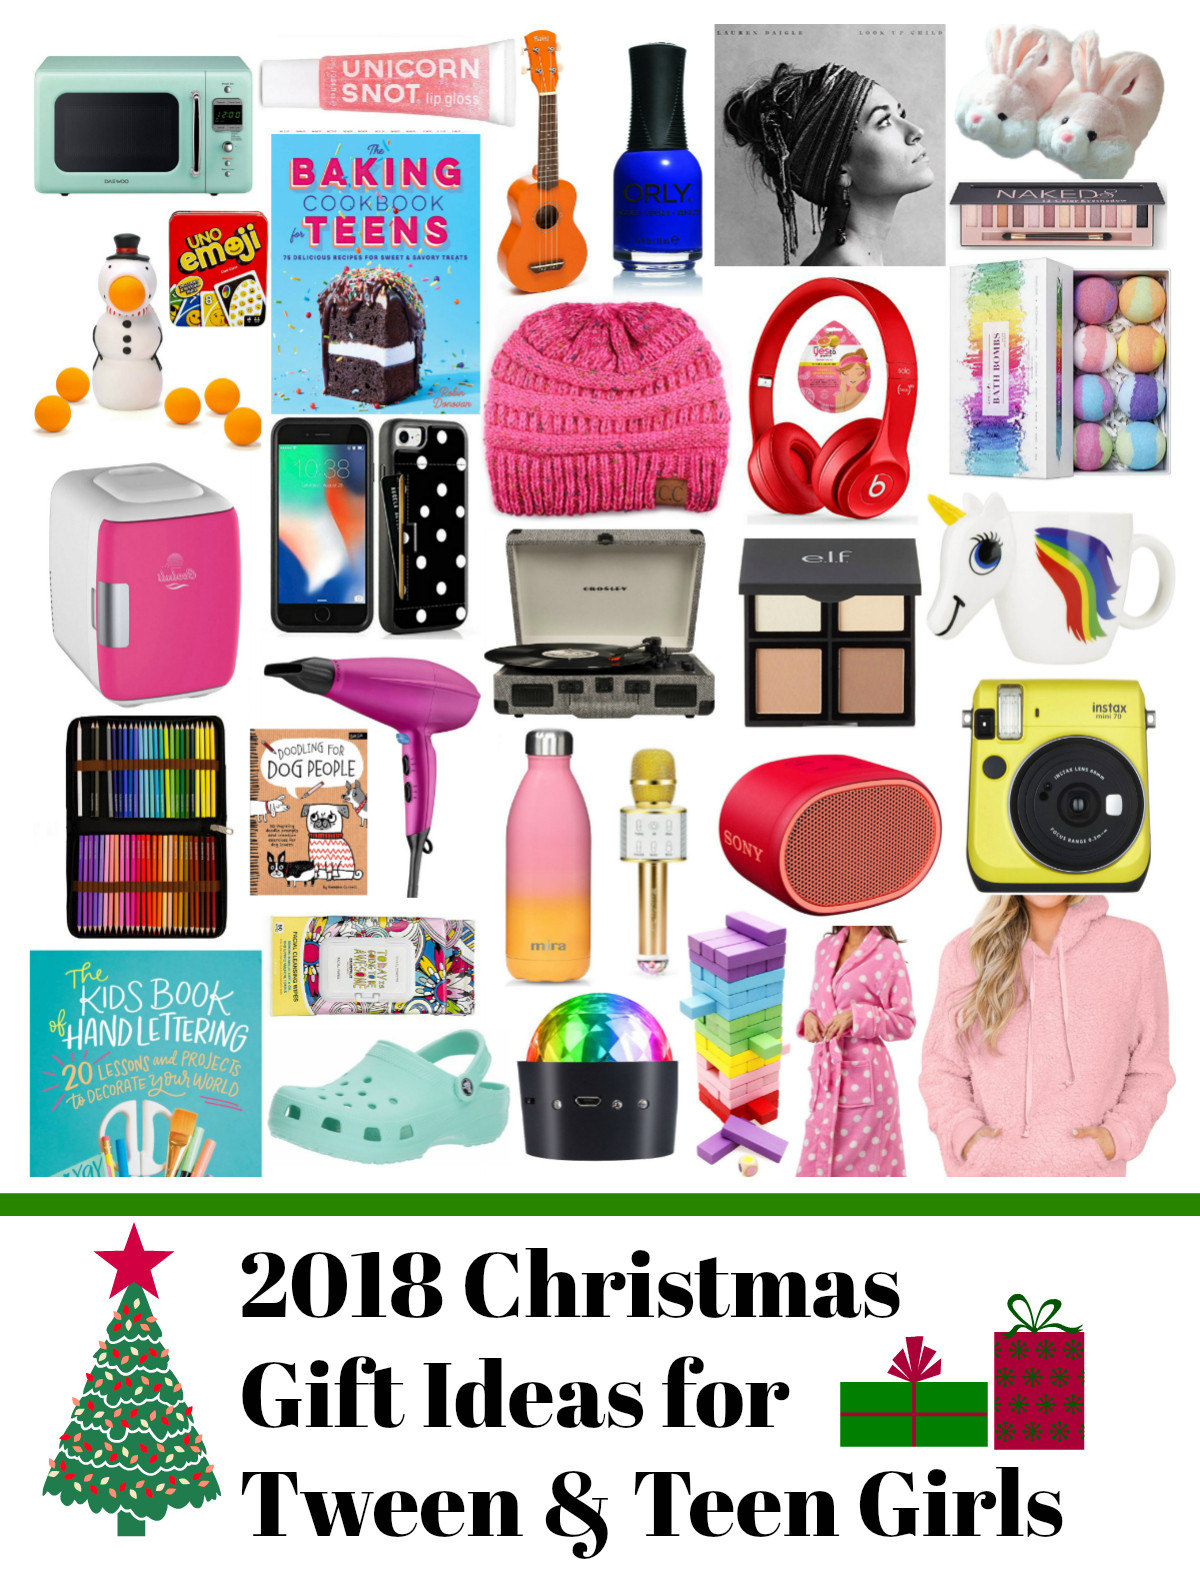 The Best Christmas Gifts for Tweens Home, Family, Style and Art Ideas